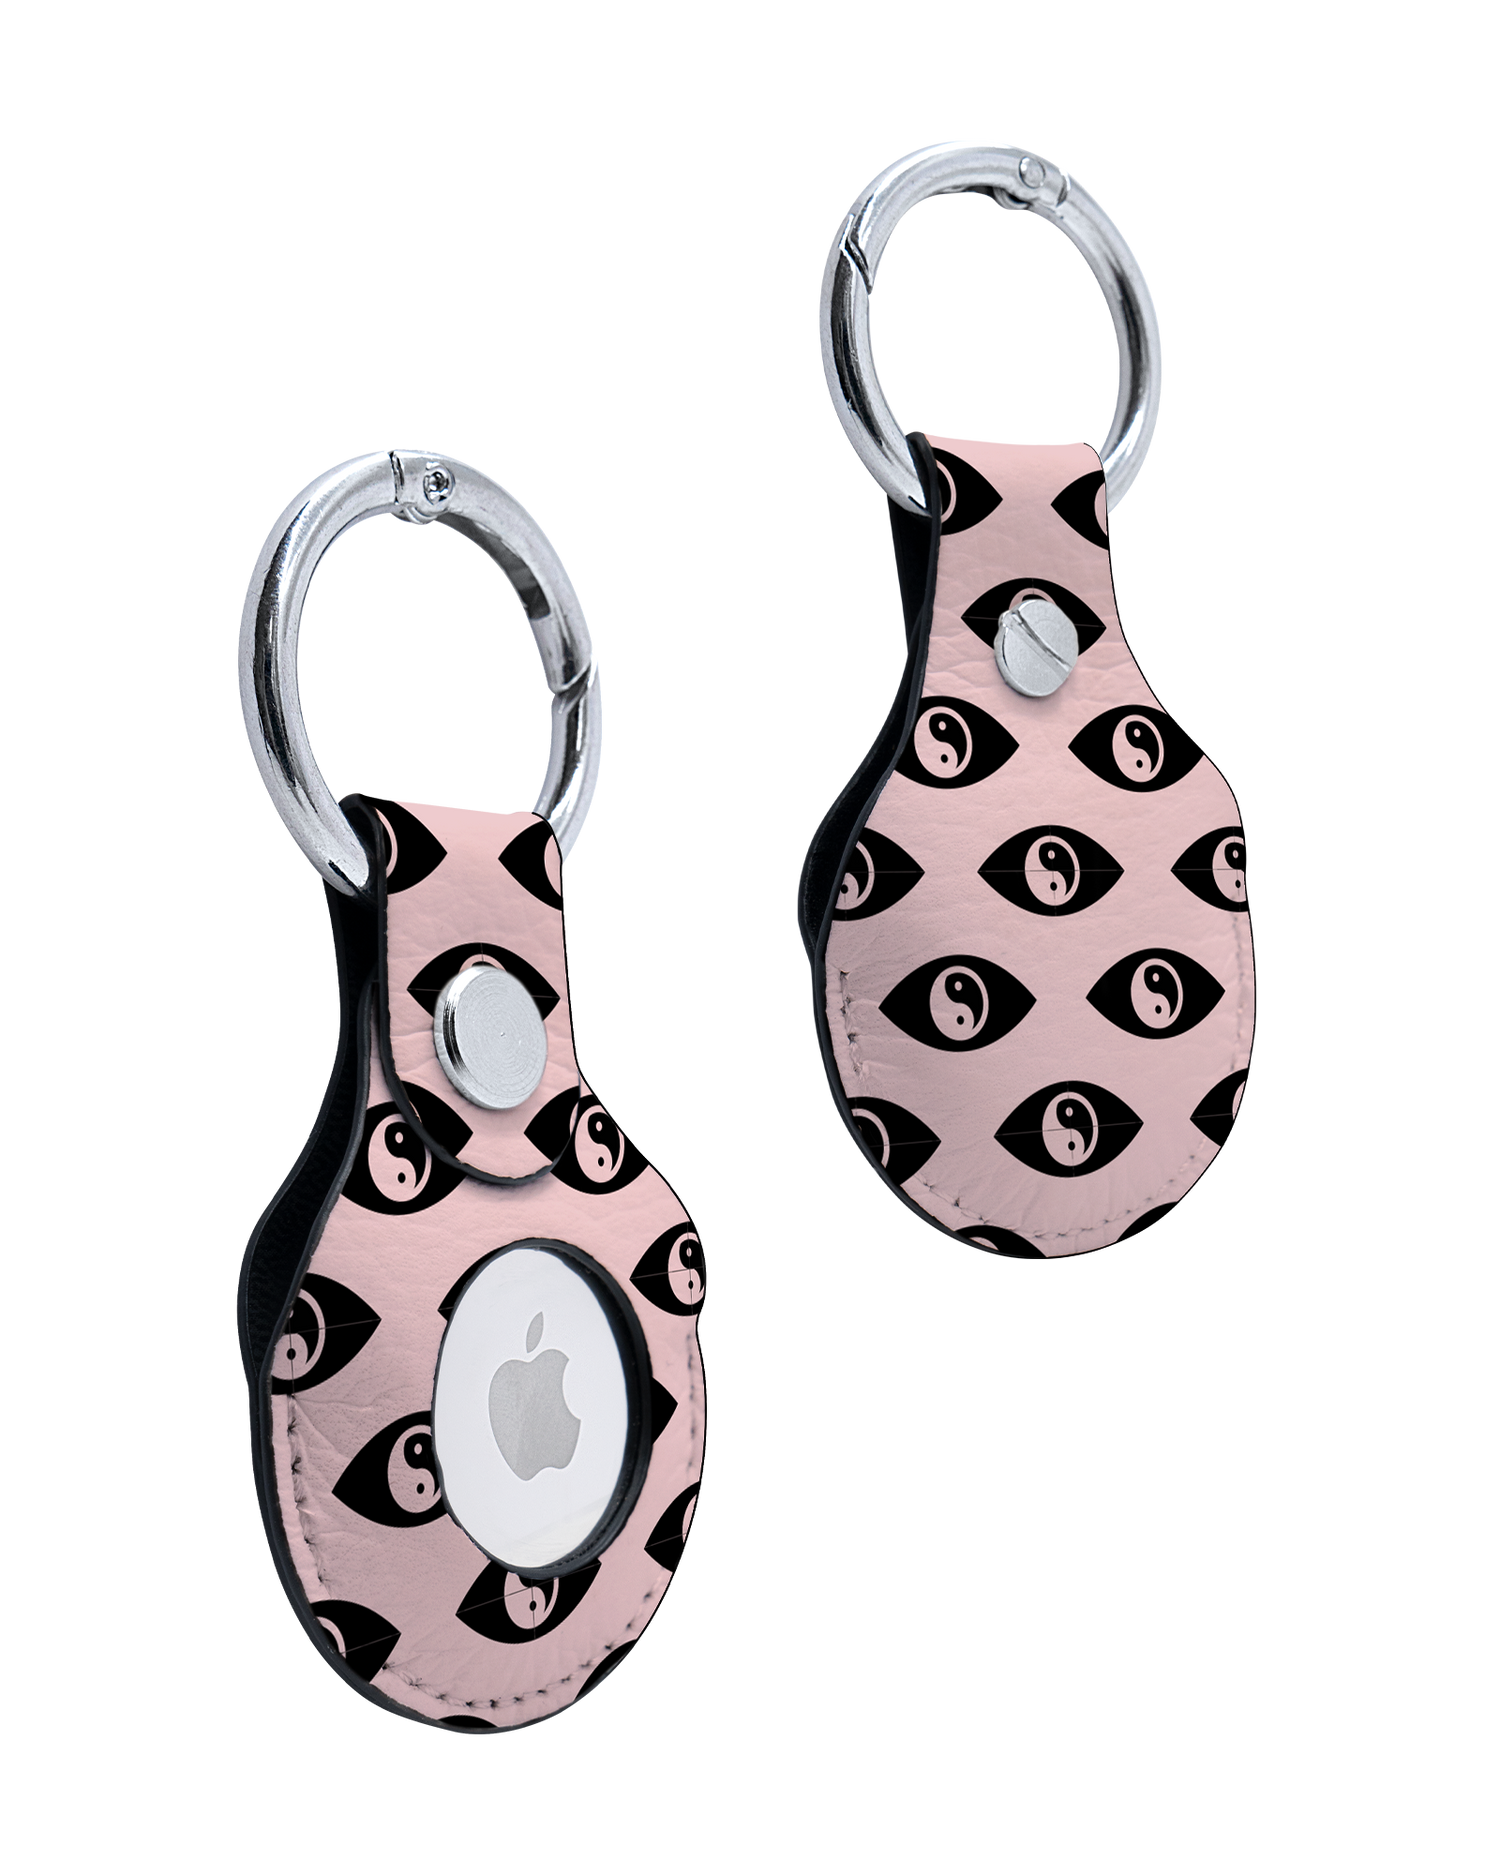 AirTag Holder with Yin Yang Repeat Design: Front and Back